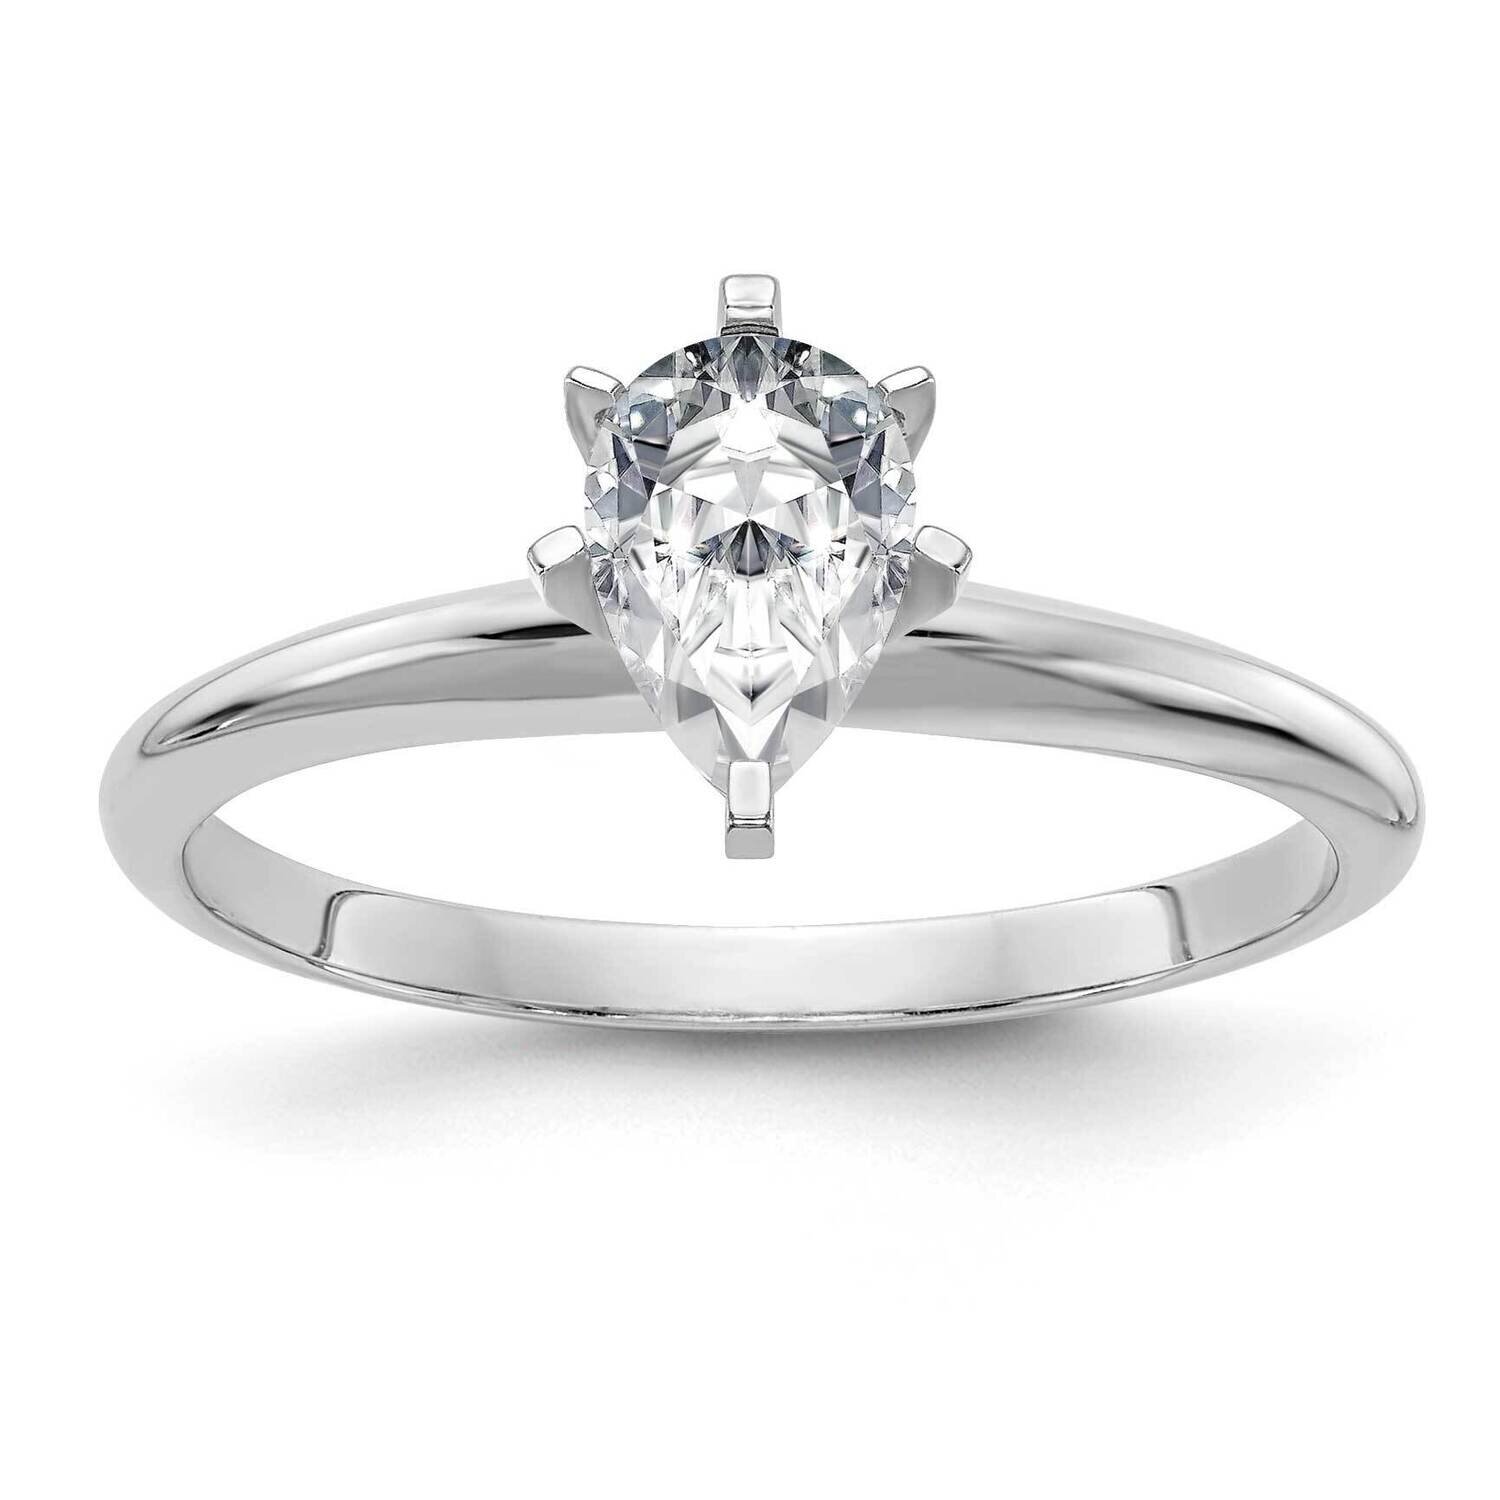 7/8ct. G H I True Light Pear Moissanite Solitaire Ring 14k White Gold WGSH15A-12MT